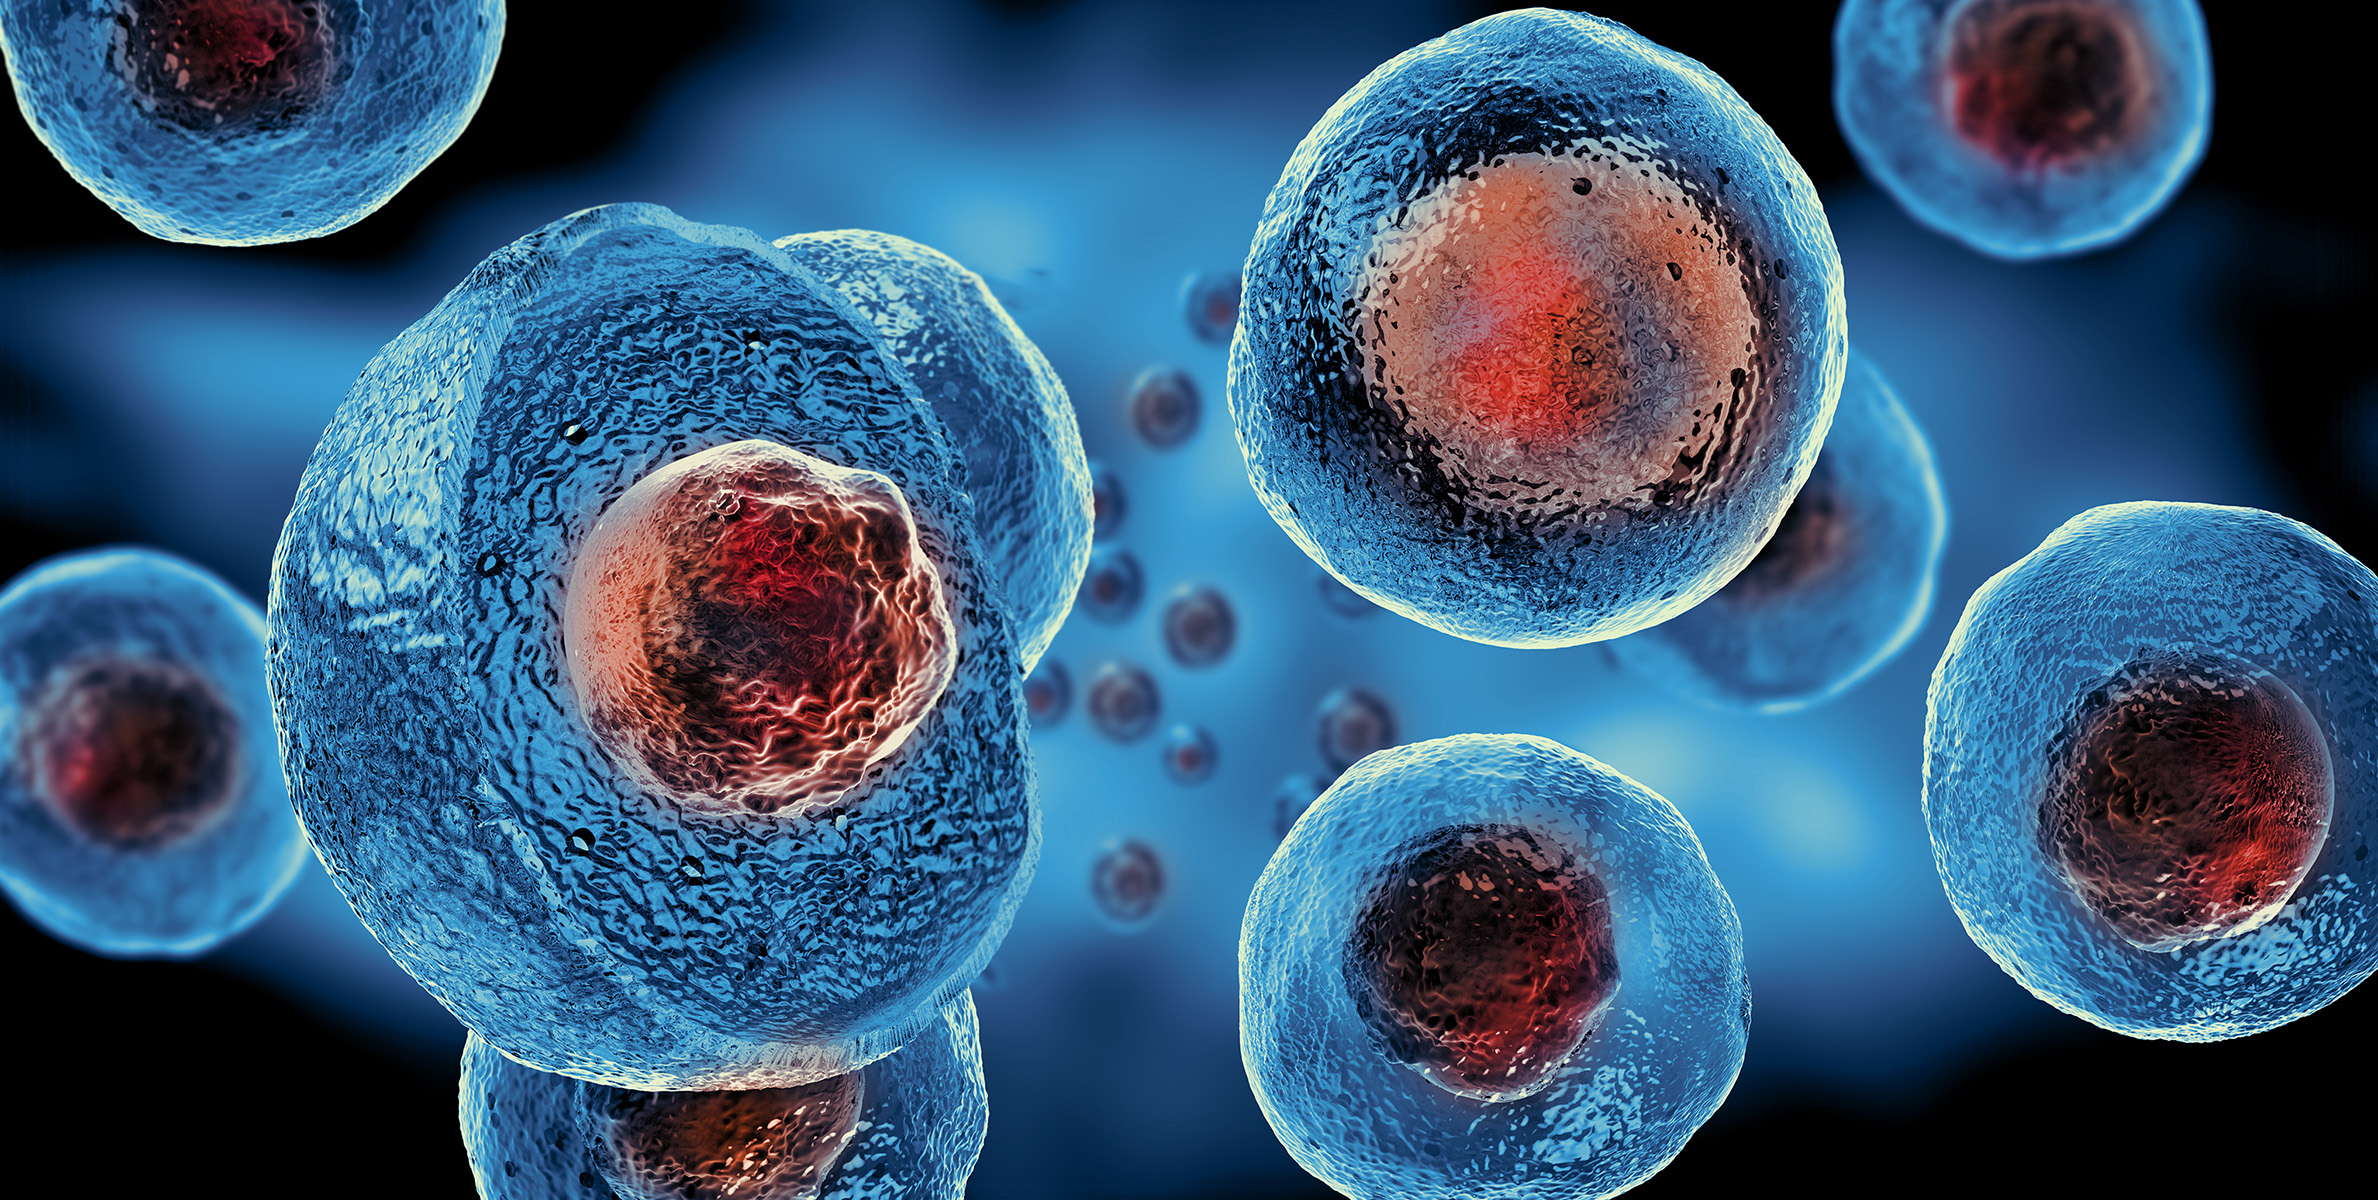 Why is Mexico Gaining Popularity for Stem Cell Therapy?